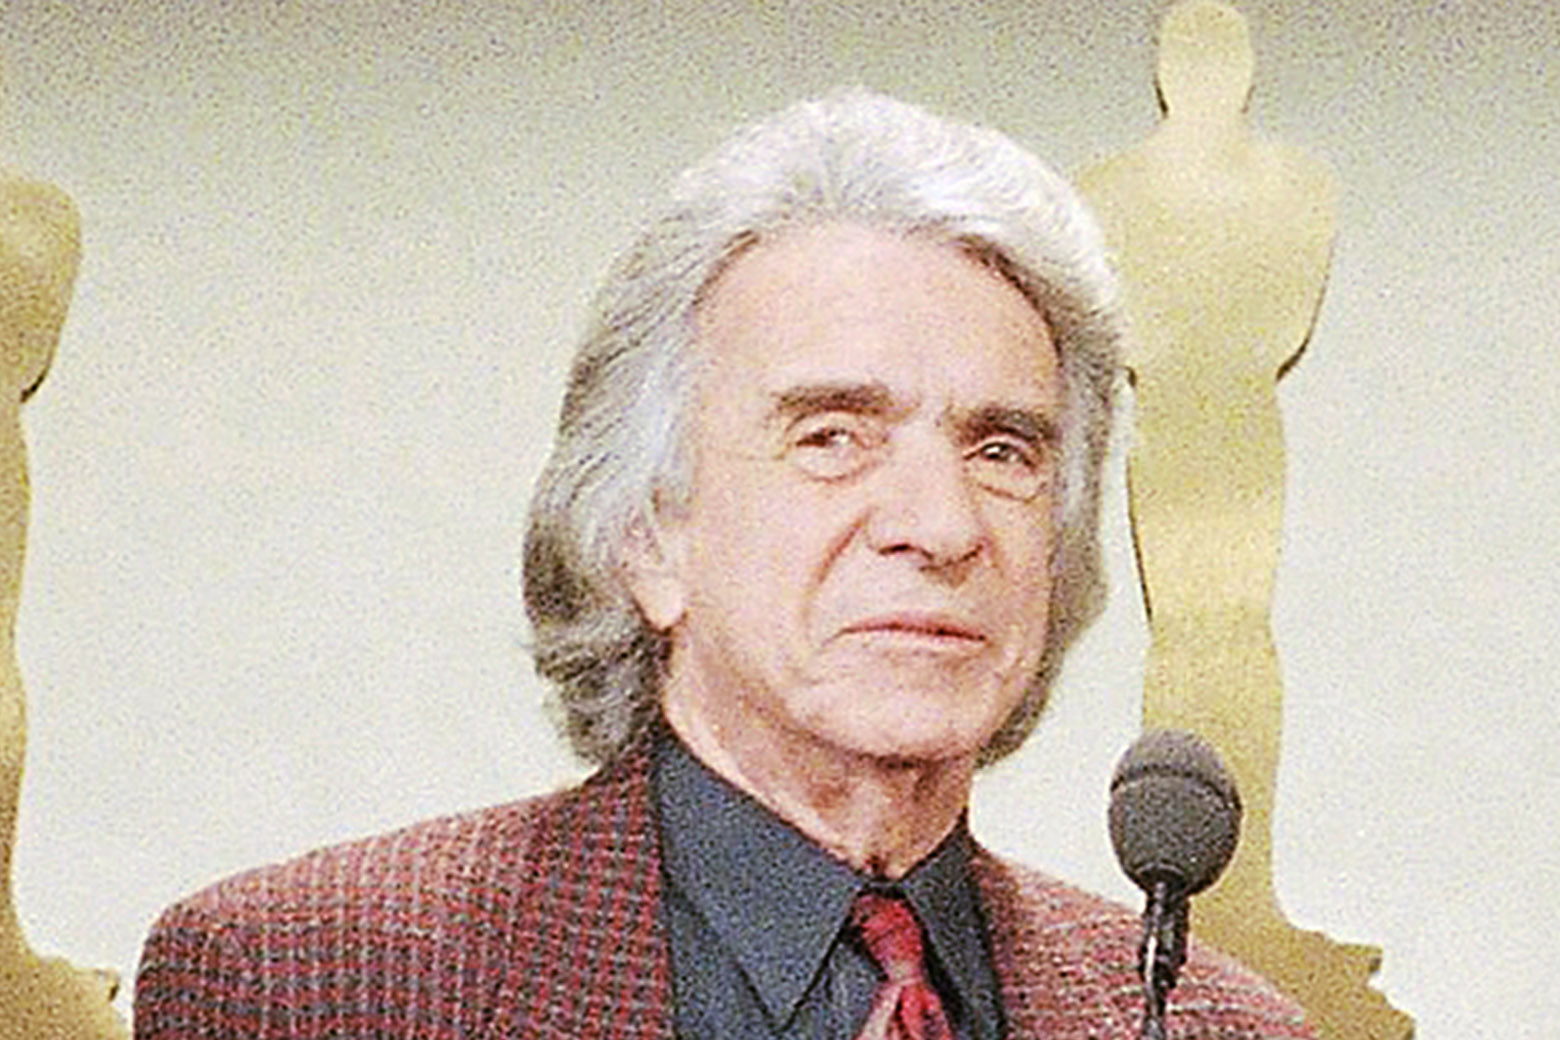 FILE - In this Feb. 11, 1997 file photo, Arthur Hiller, President of the Academy of Motion Picture Arts and Sciences, announces best actress Oscar nominees at the Academy headquarters in Beverly Hills, Calif.  Hiller, who received an Oscar nomination for directing the romantic tragedy "Love Story" during a career that spanned dozens of popular movies and TV shows," died Wednesday, Aug. 17, 2016, of natural causes. He was 92. (AP Photo/Nick Ut, File)